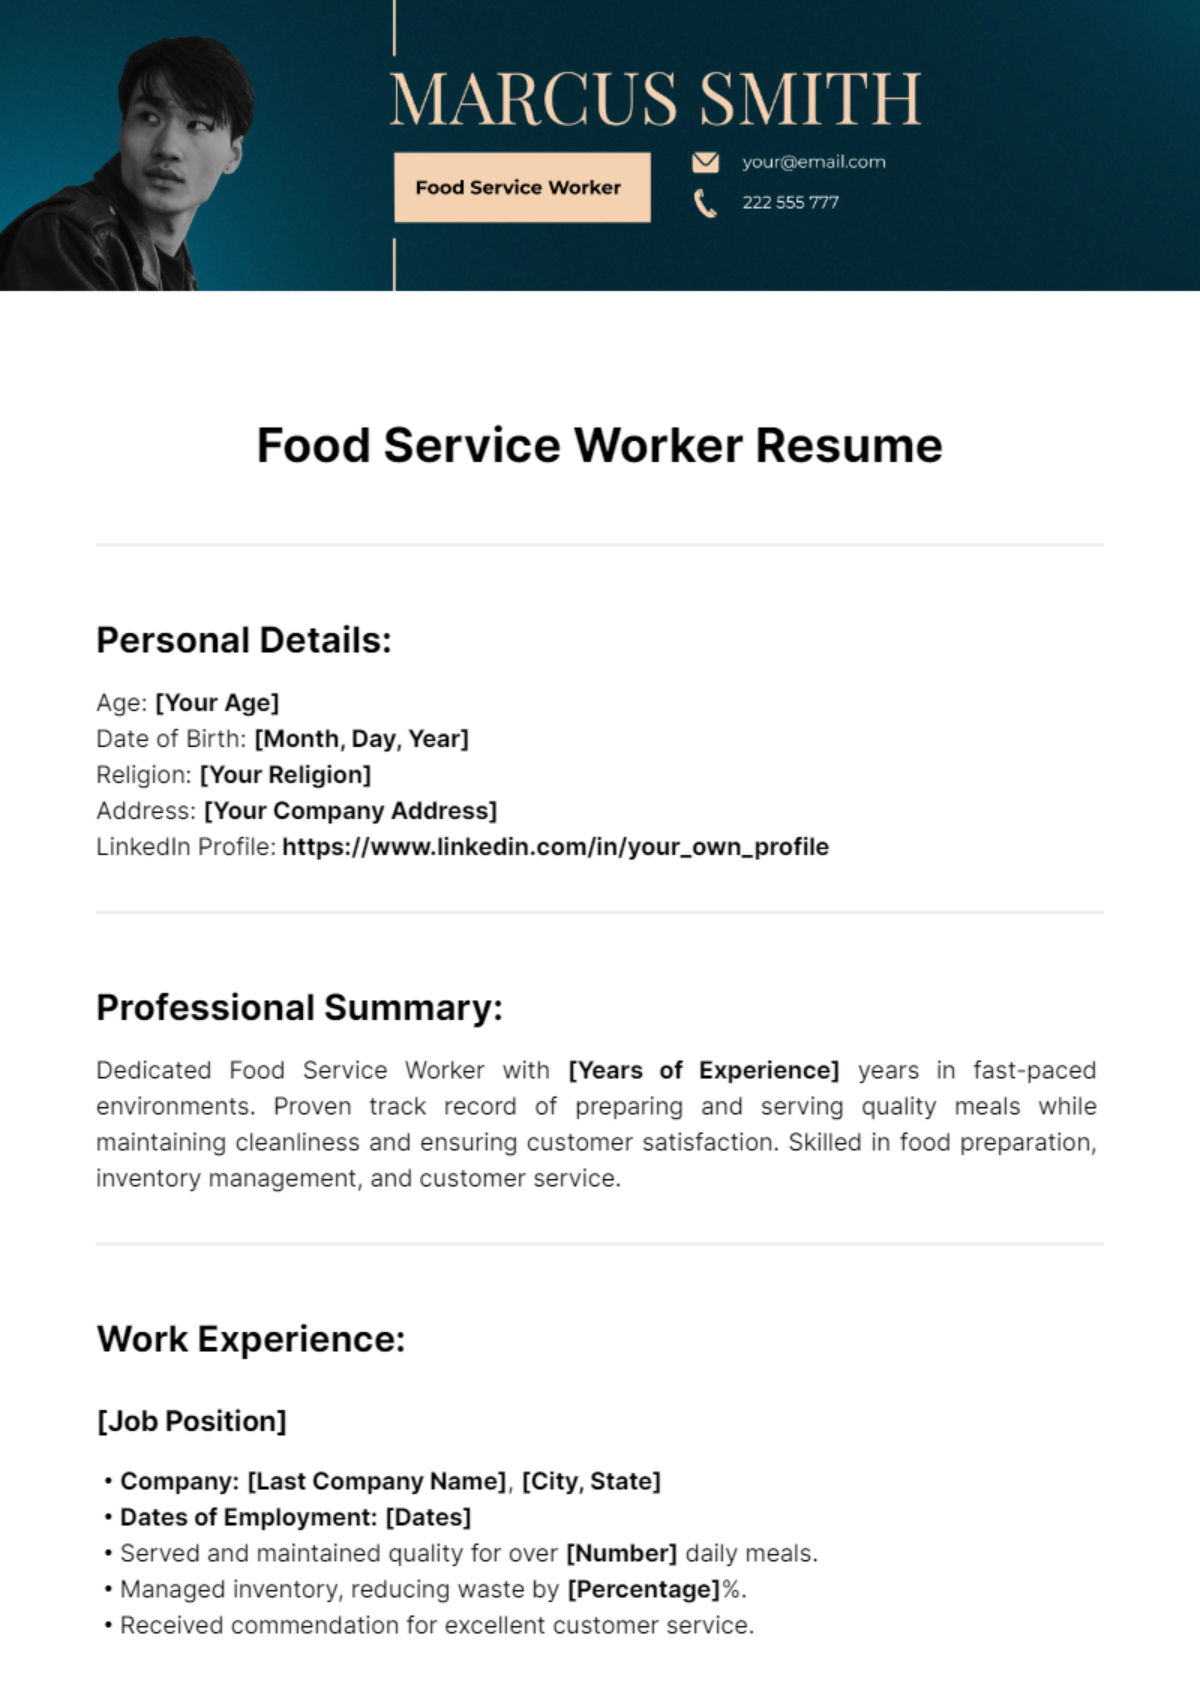 Food Service Worker Resume Template